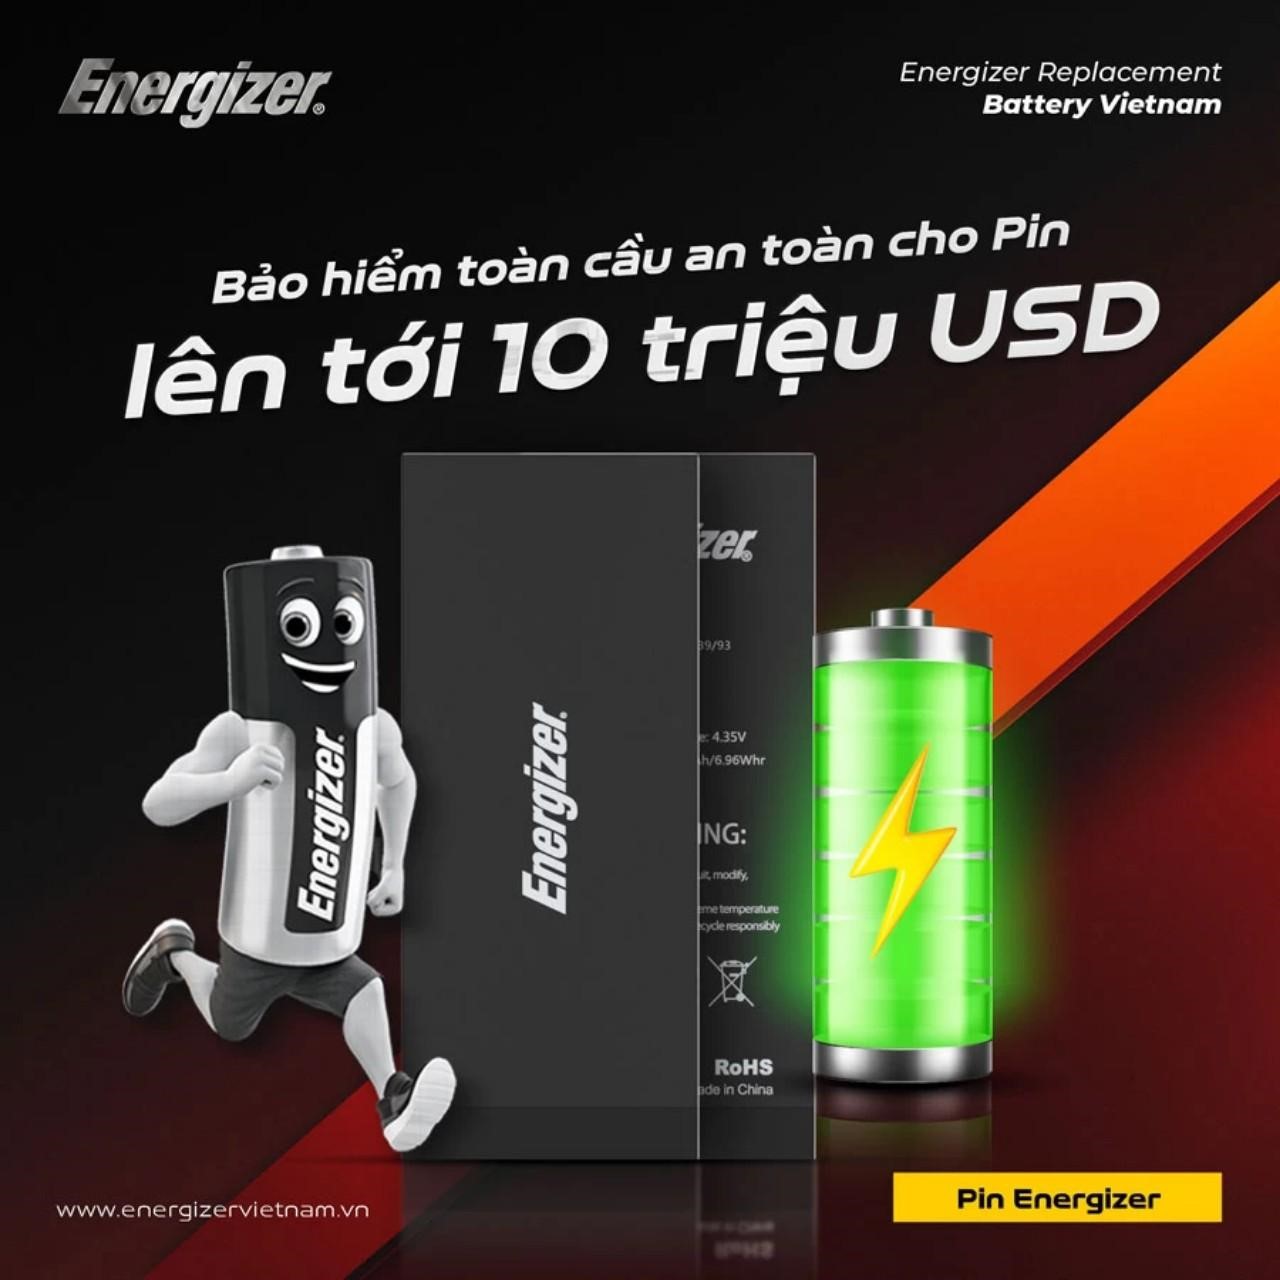 A black and white advertisement with a cartoon character and a batteryDescription automatically generated